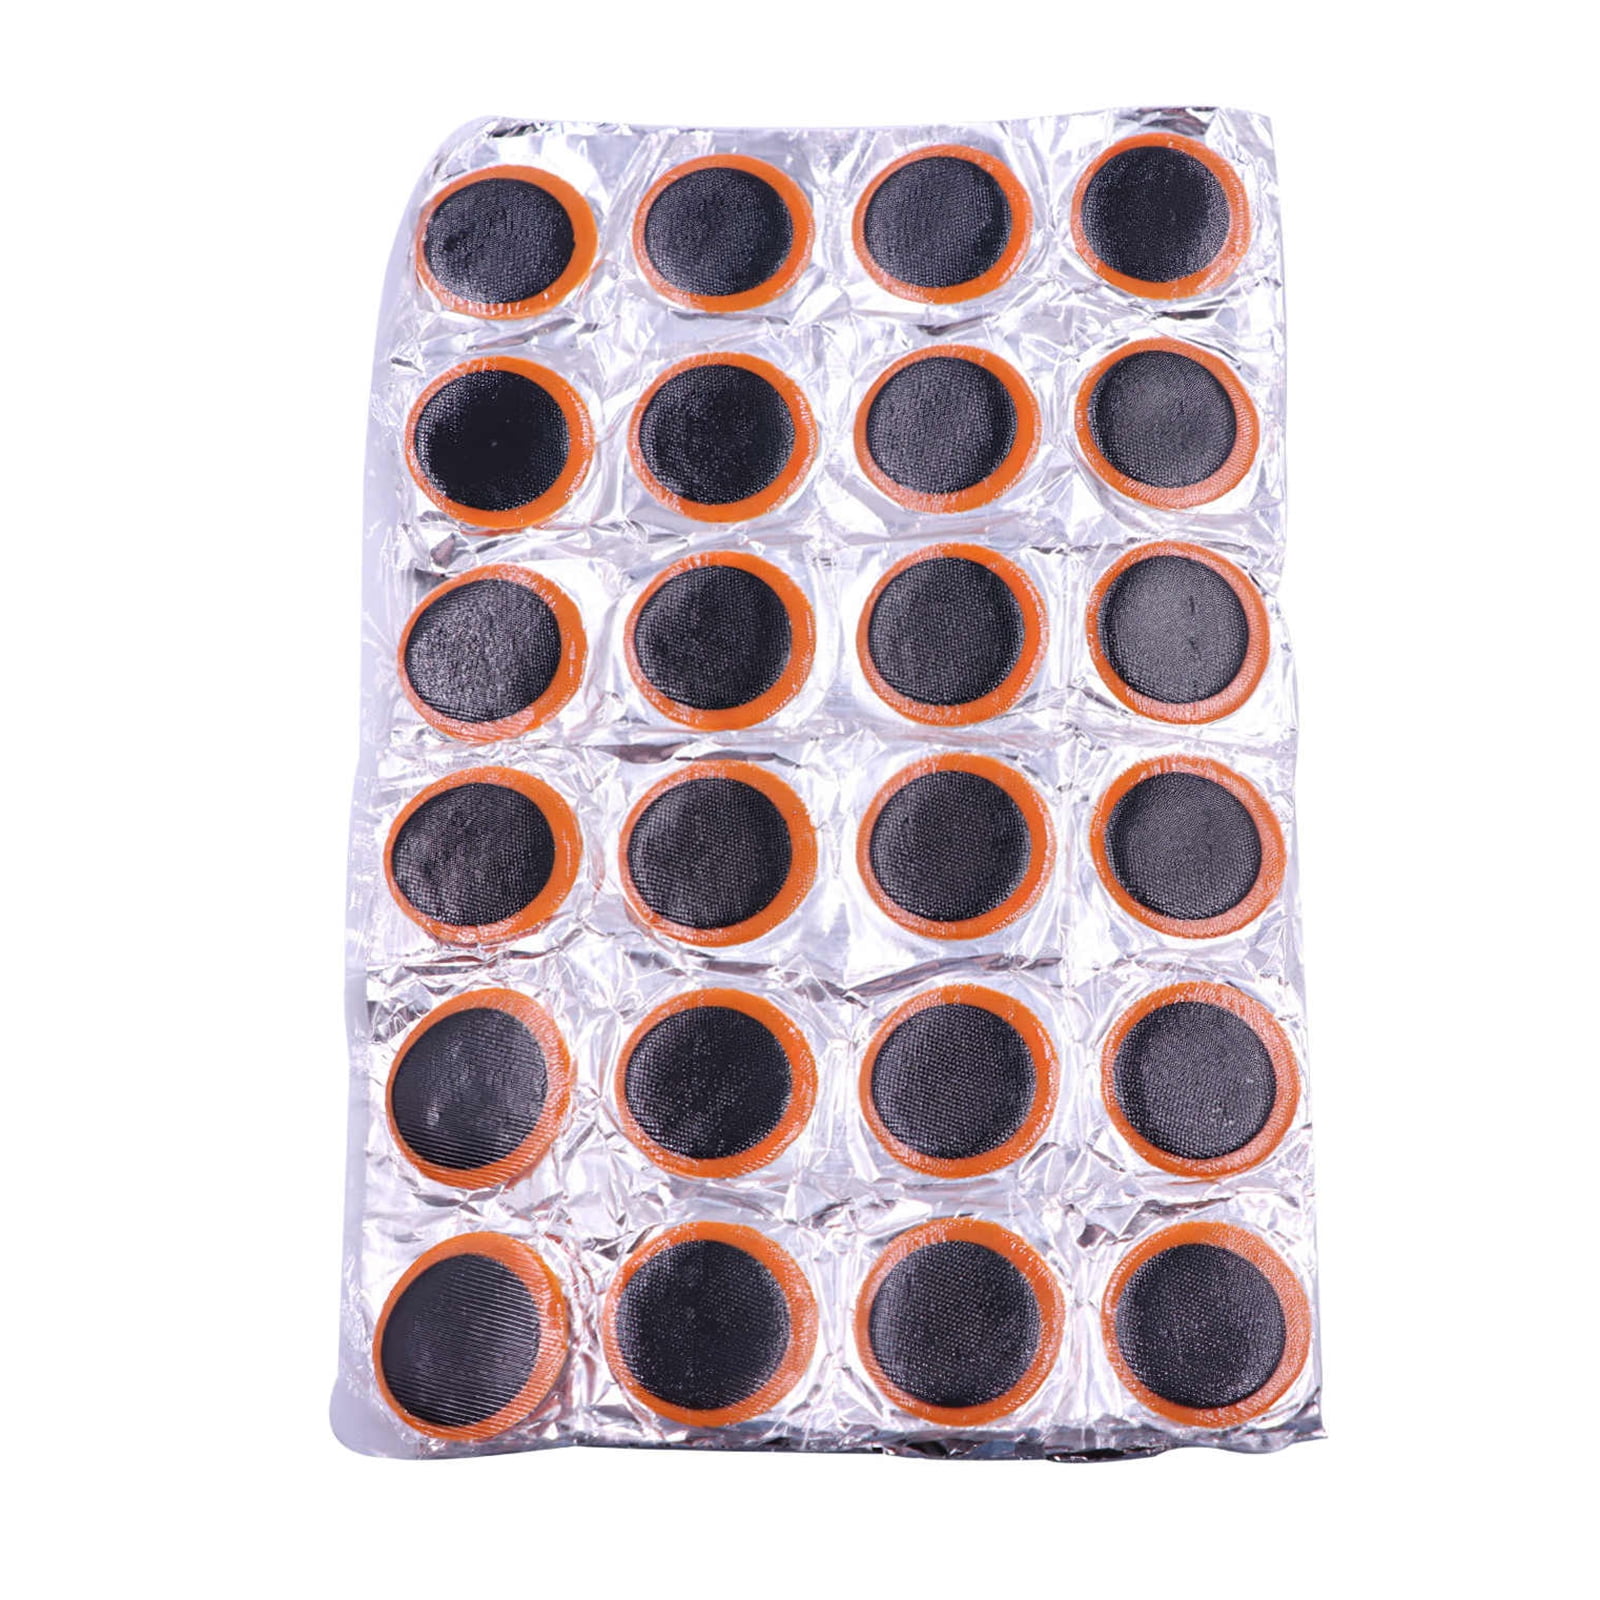 48pcs Tire Patch Rubber Bike Tyre Repair Pad Portable Tire Inner Tube Pad 